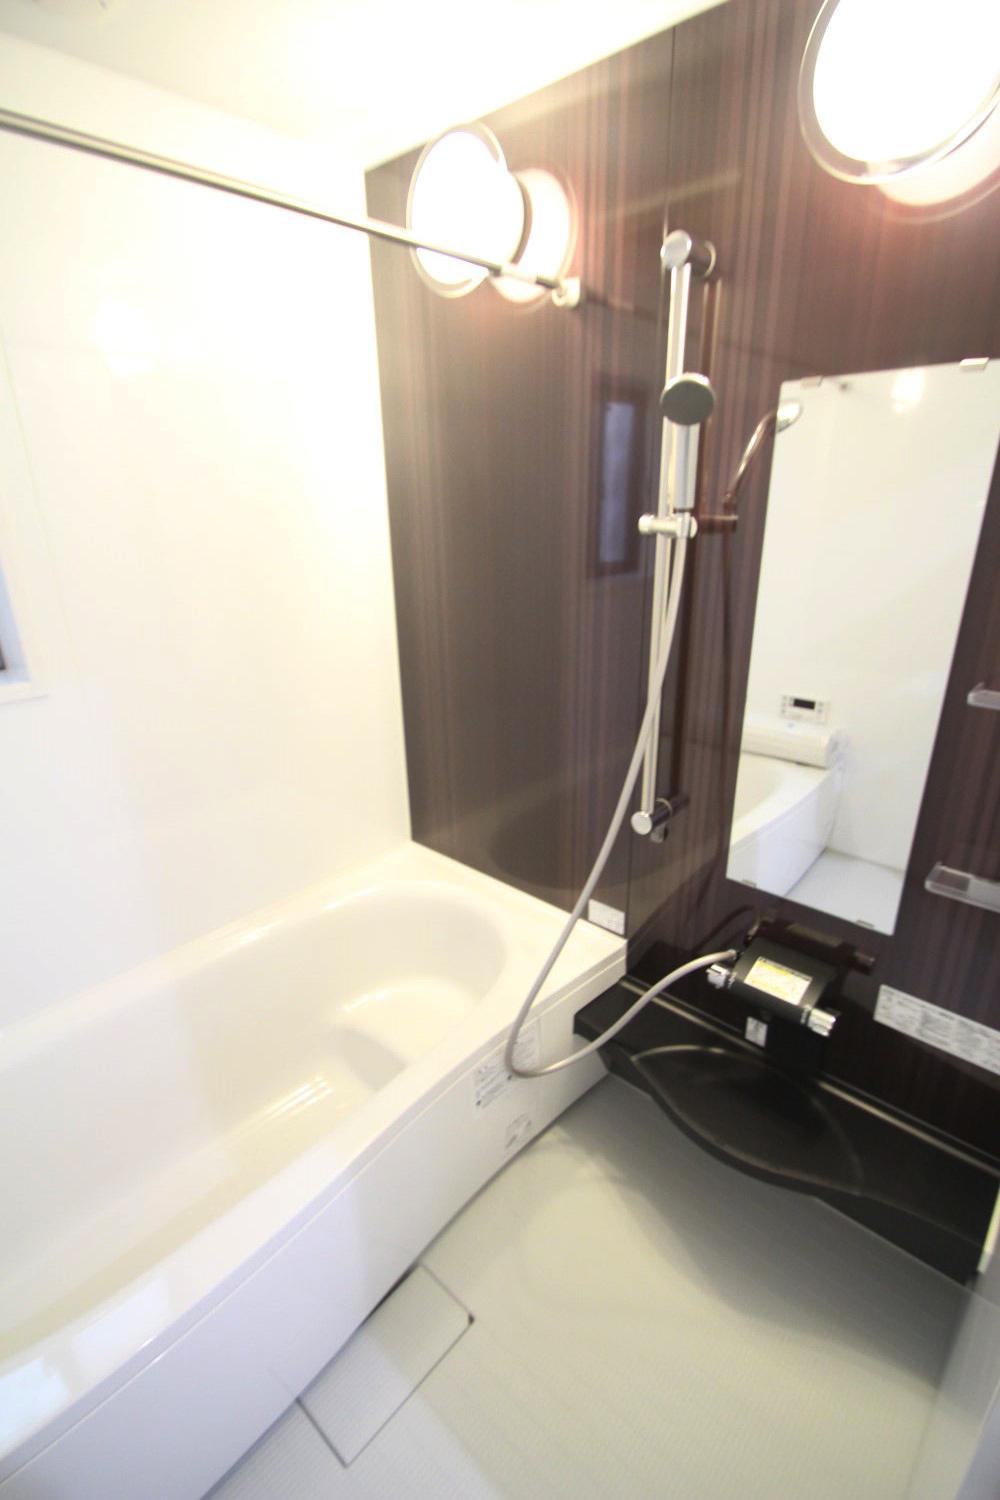 Bathroom. Bathroom is with a ventilation dryer. It is a space that will heal daily fatigue.